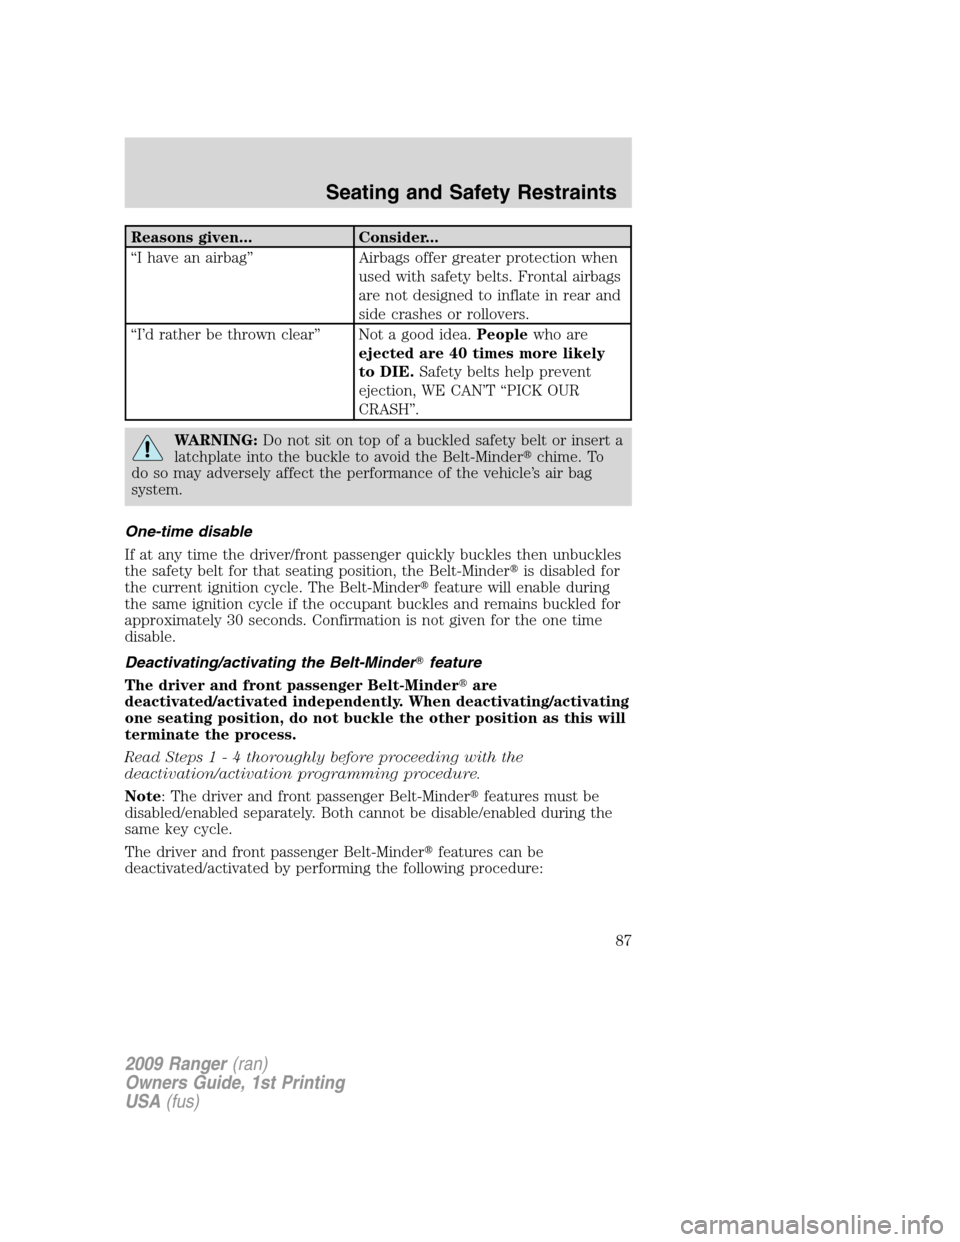 FORD RANGER 2009 2.G Owners Manual Reasons given... Consider...
“I have an airbag” Airbags offer greater protection when
used with safety belts. Frontal airbags
are not designed to inflate in rear and
side crashes or rollovers.
“